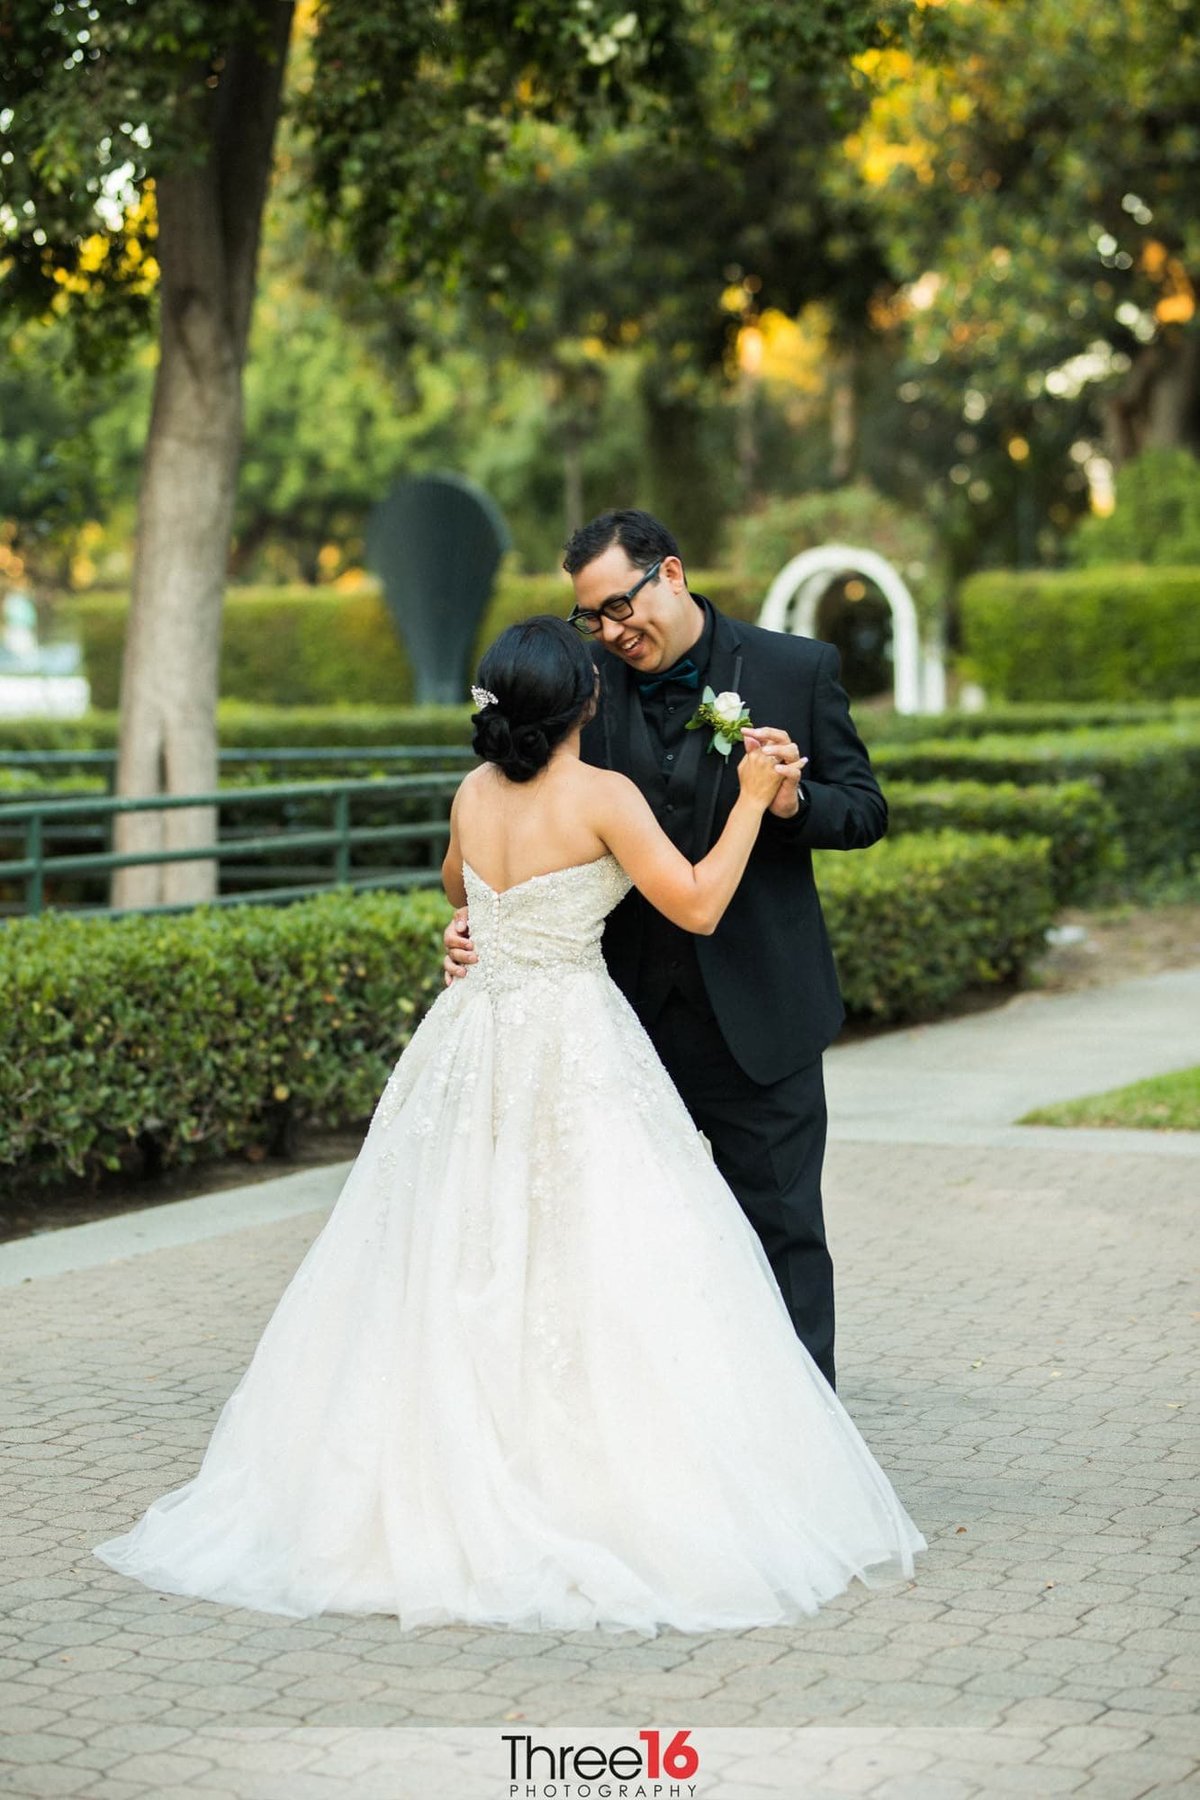 Bride and Groom share their first dance together at Heritage Park in Santa Fe Springs